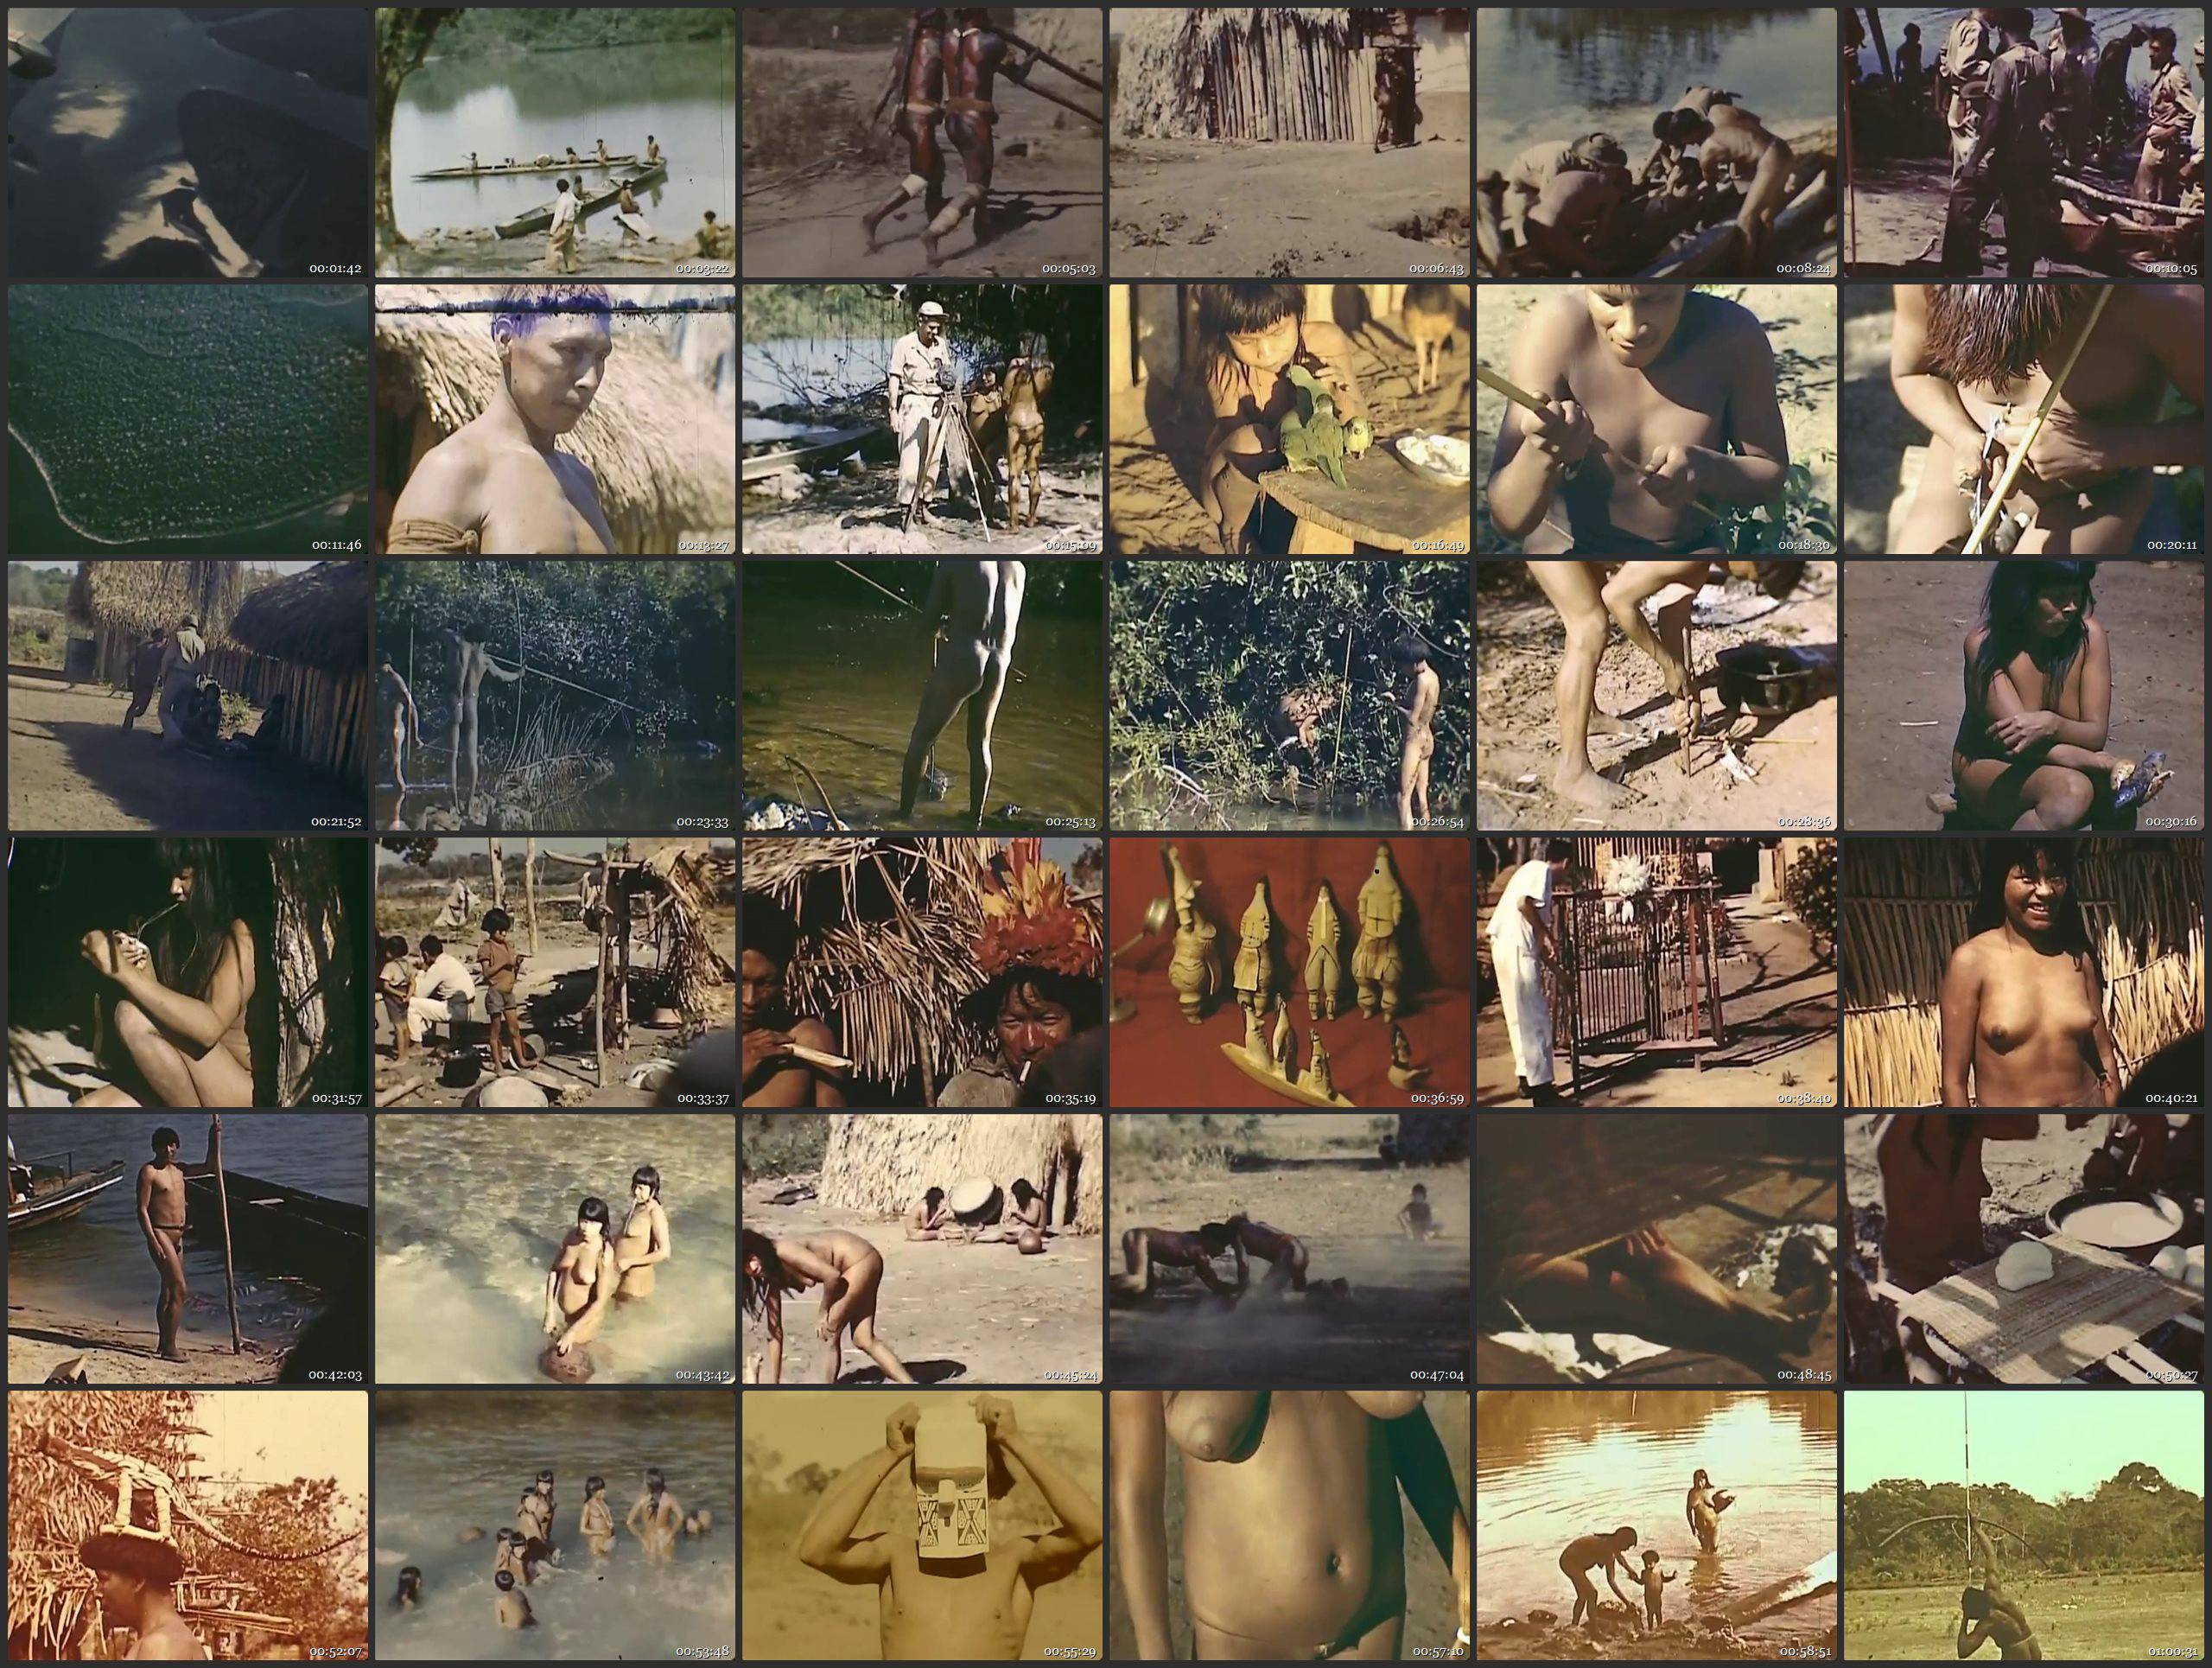 Nudist Movies-Xingu Indians - Expedition to rainforests of Brazil in 1948 - Thumbnails